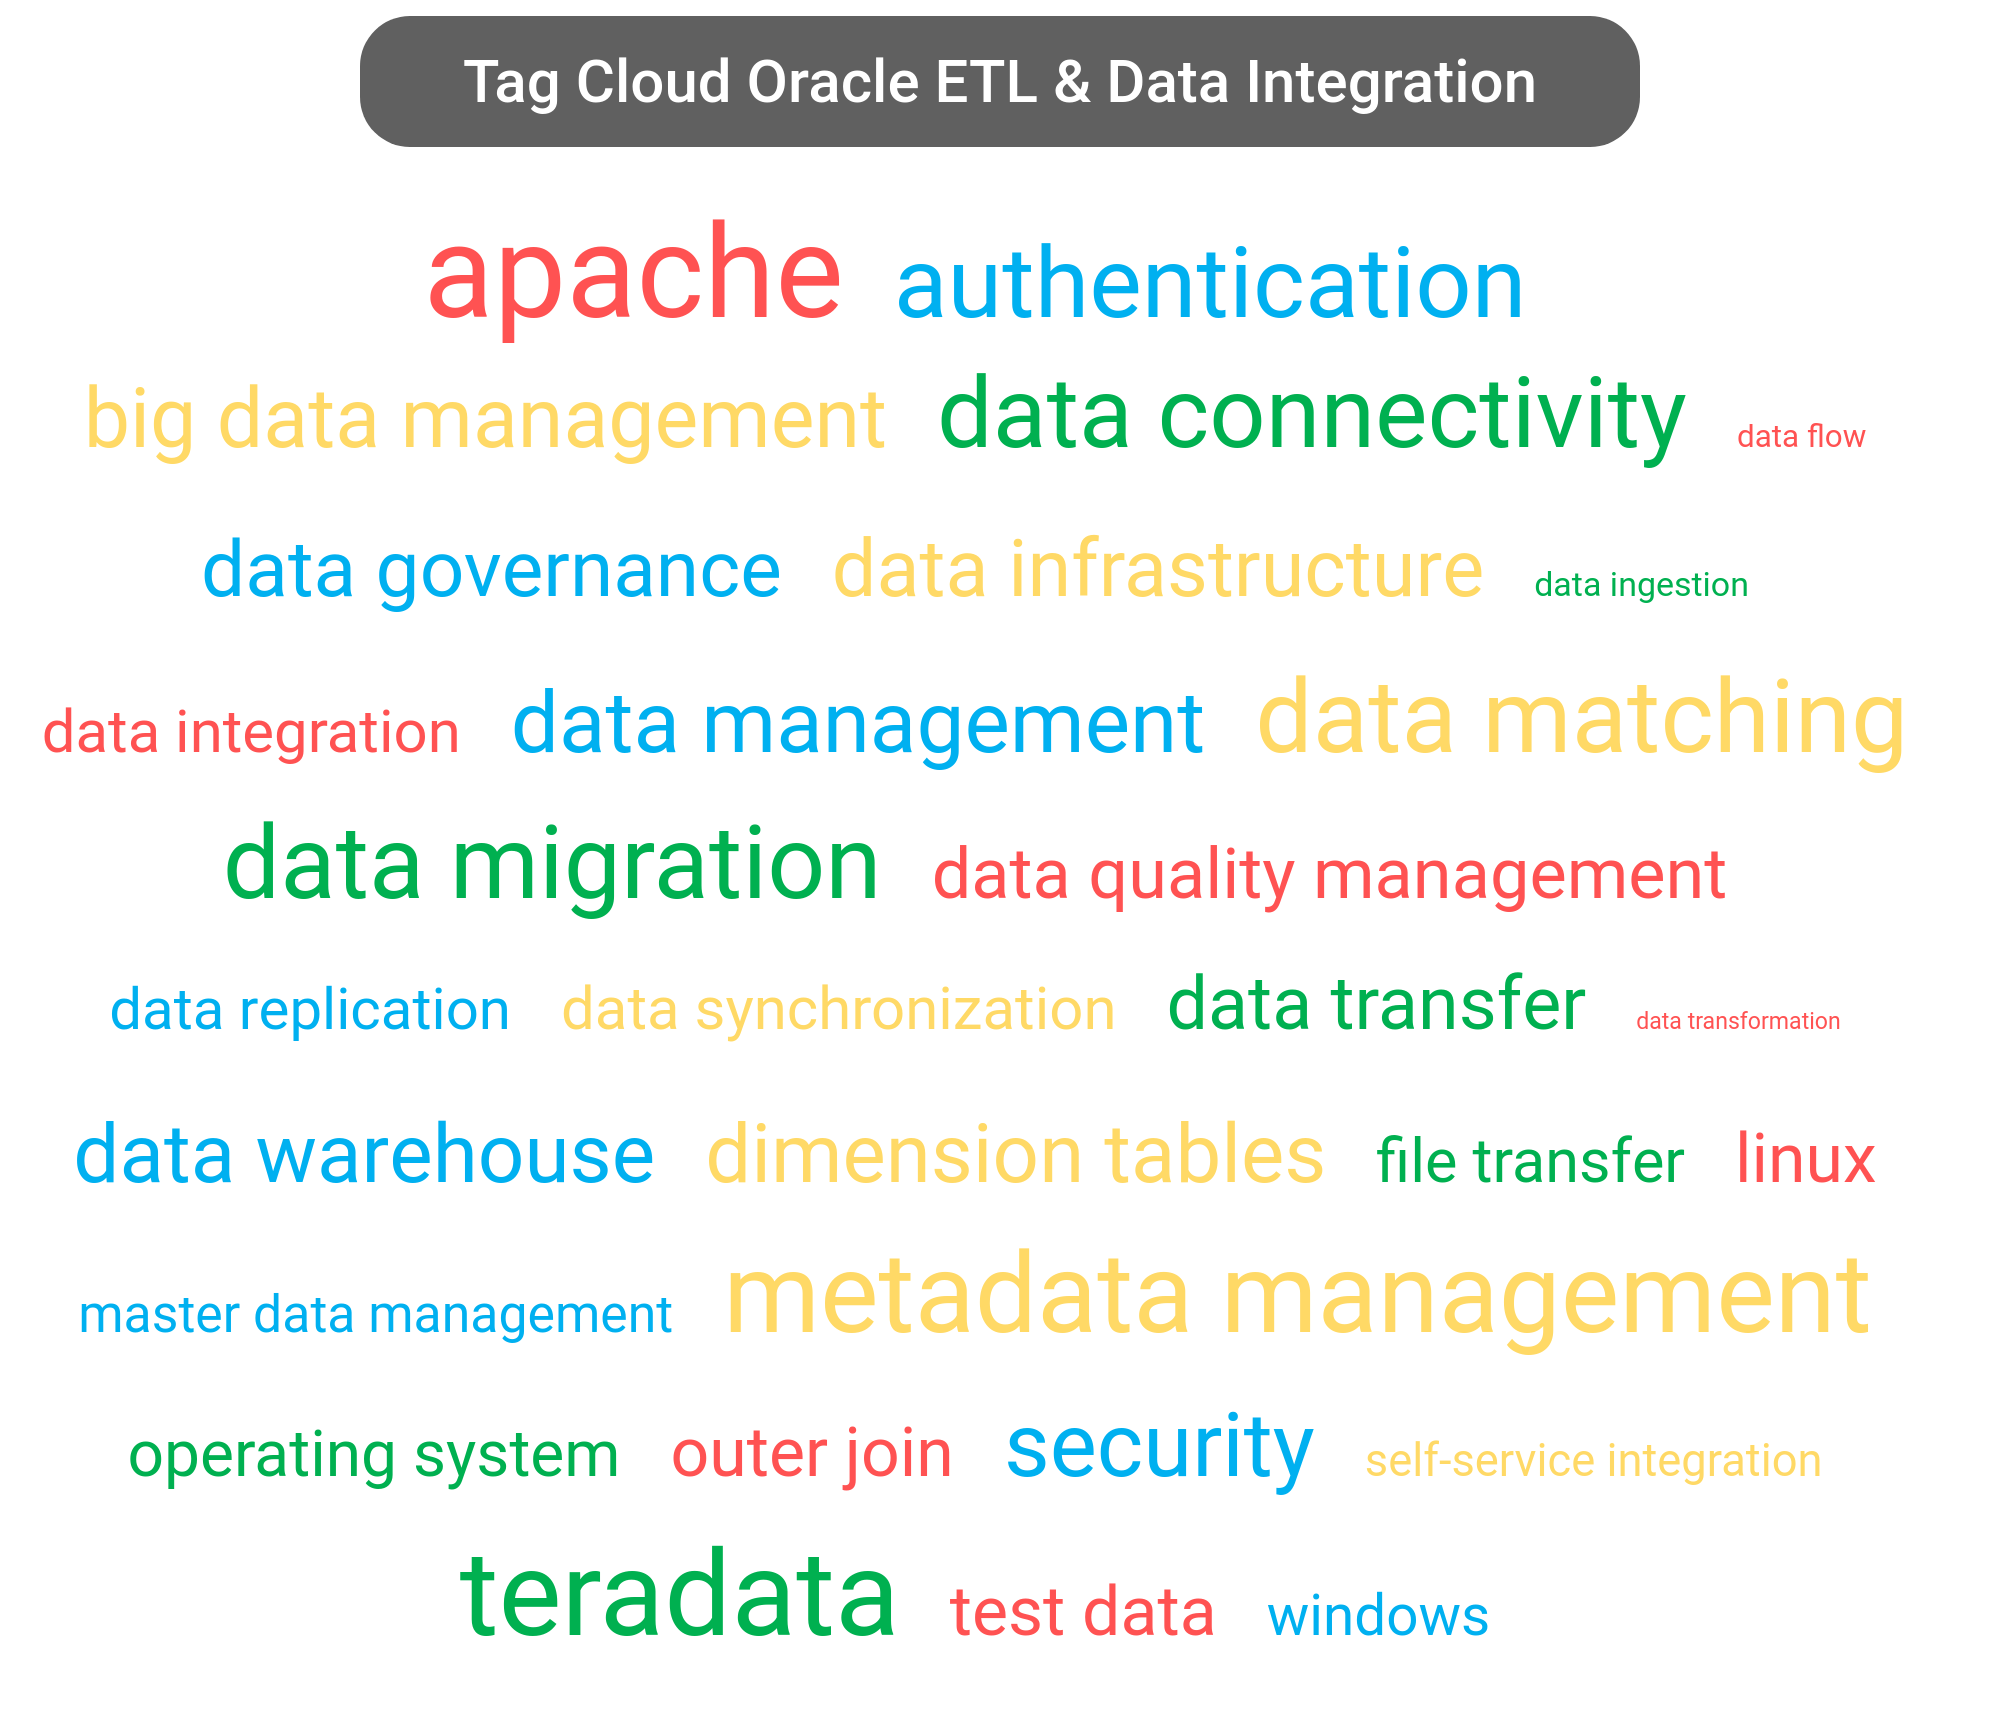 Tag cloud of the Oracle Data Integration software.